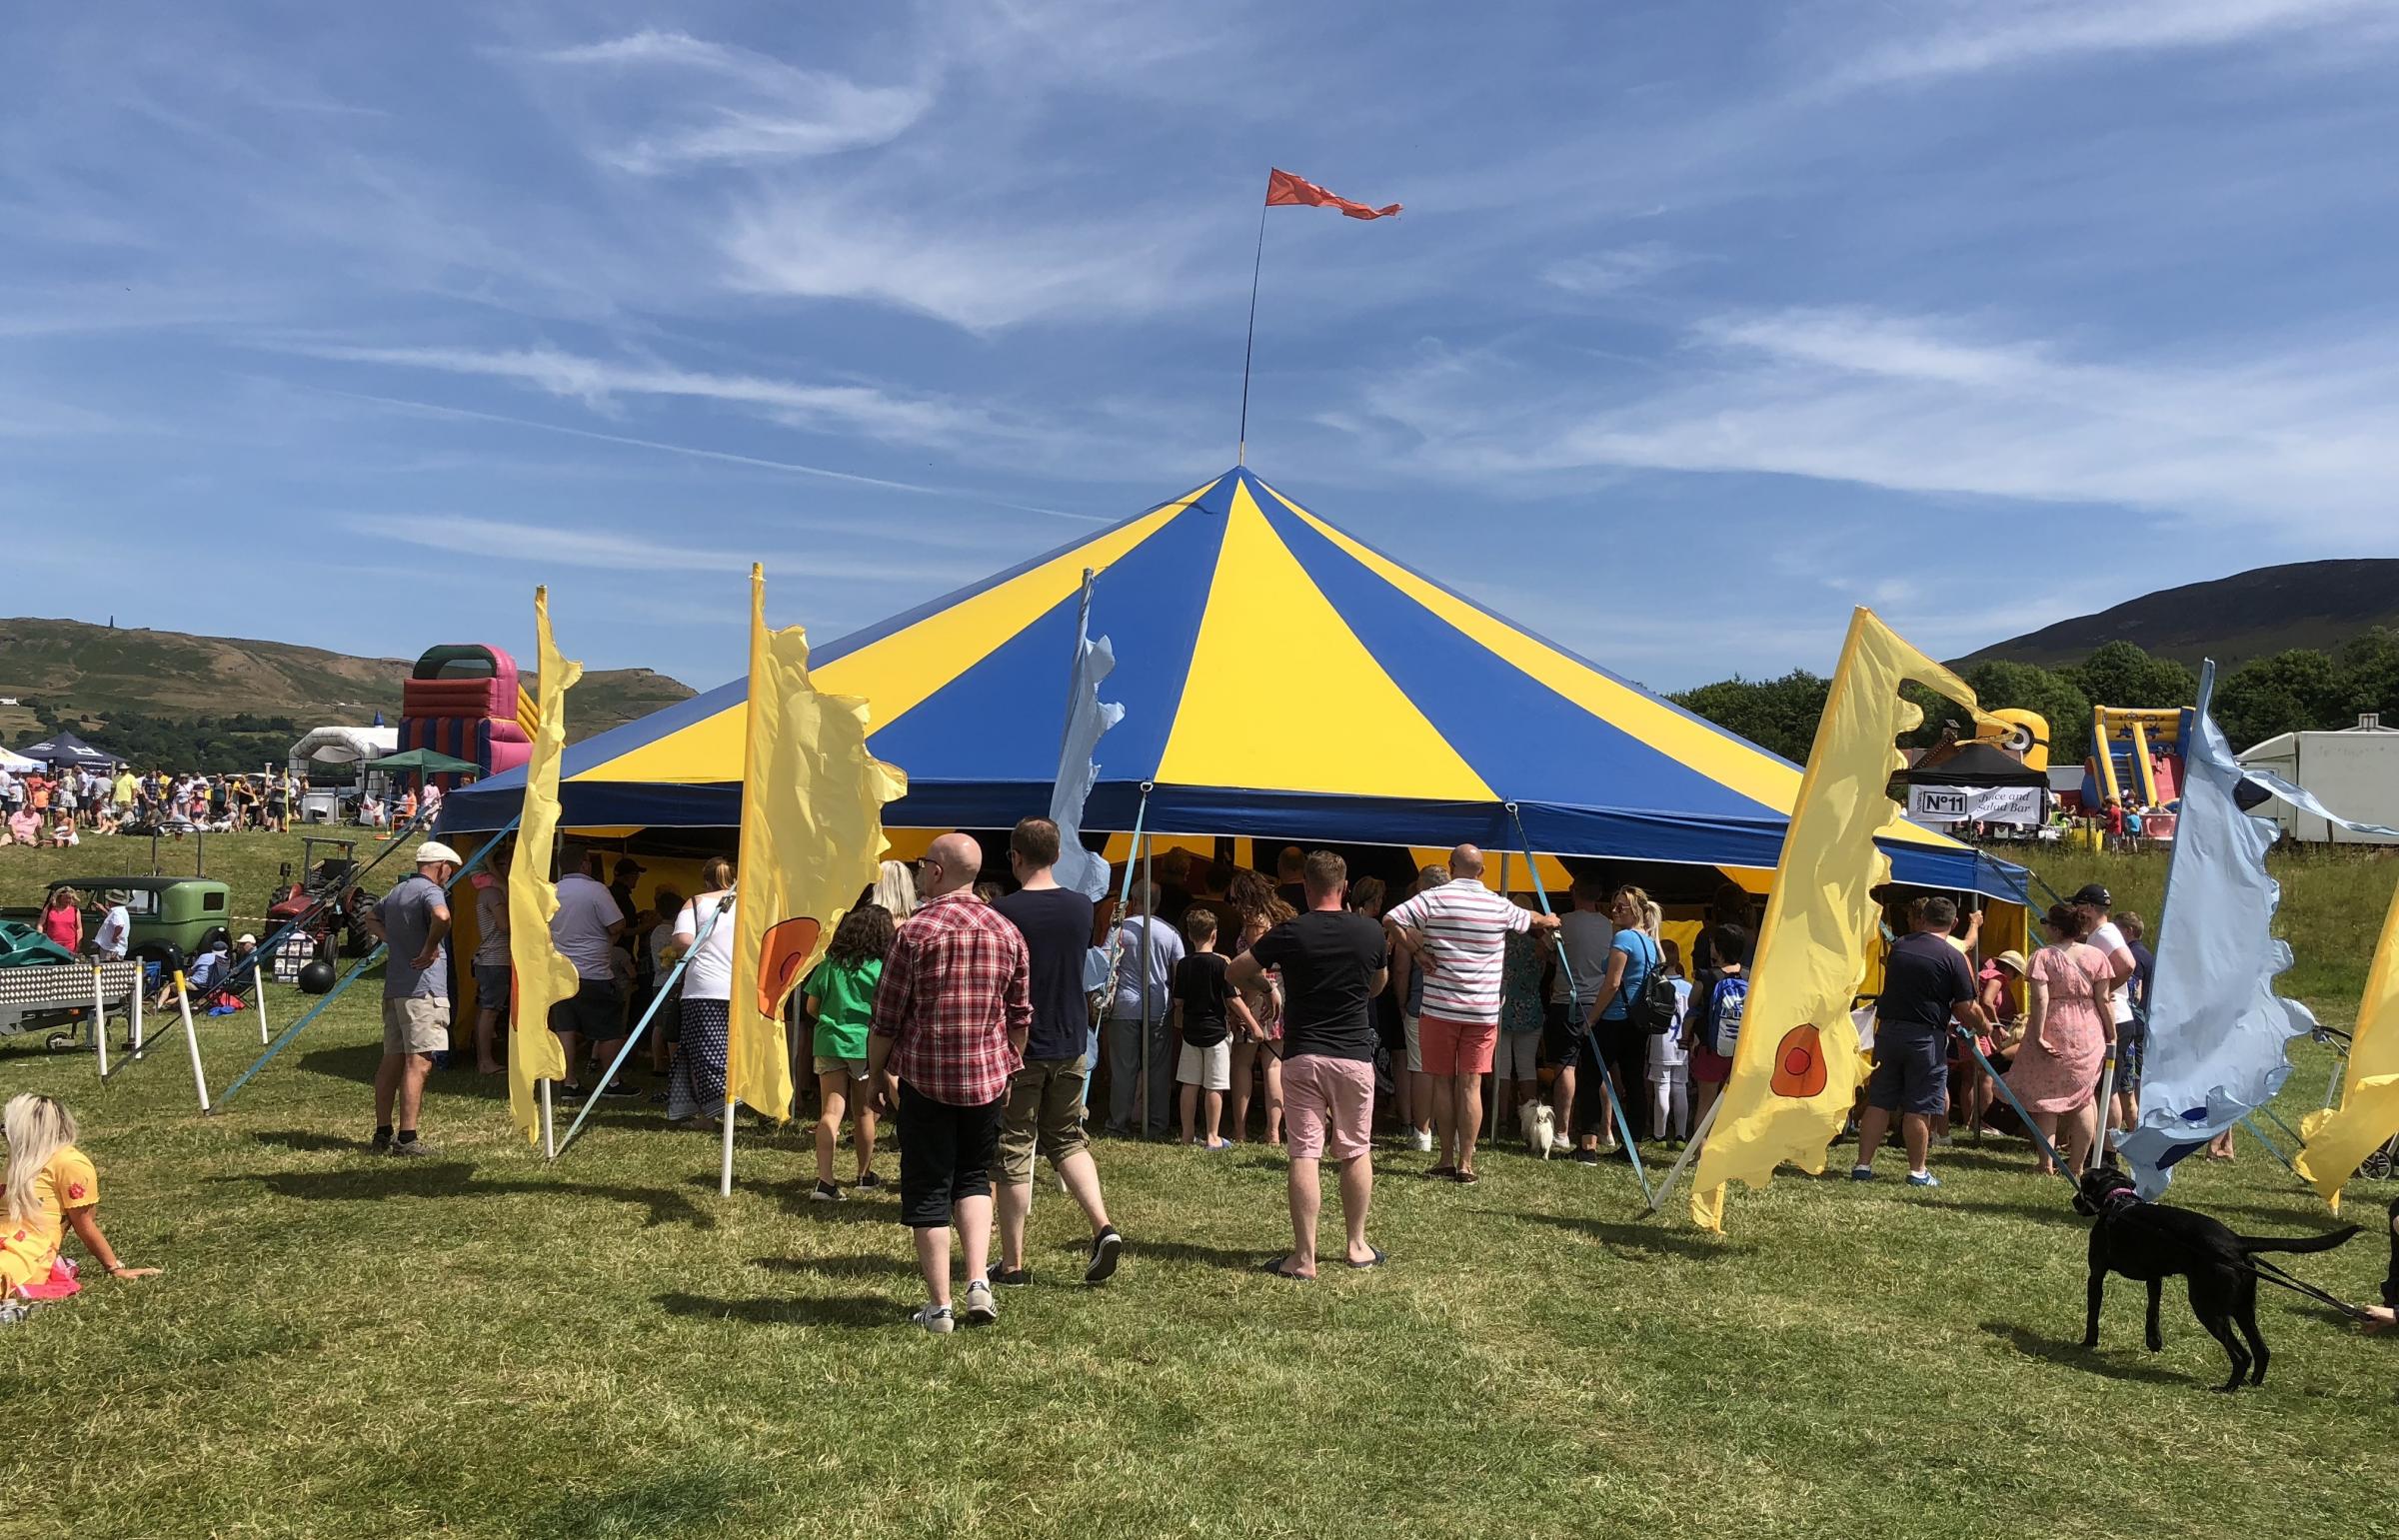 POPULAR: A tent at the show in 2019